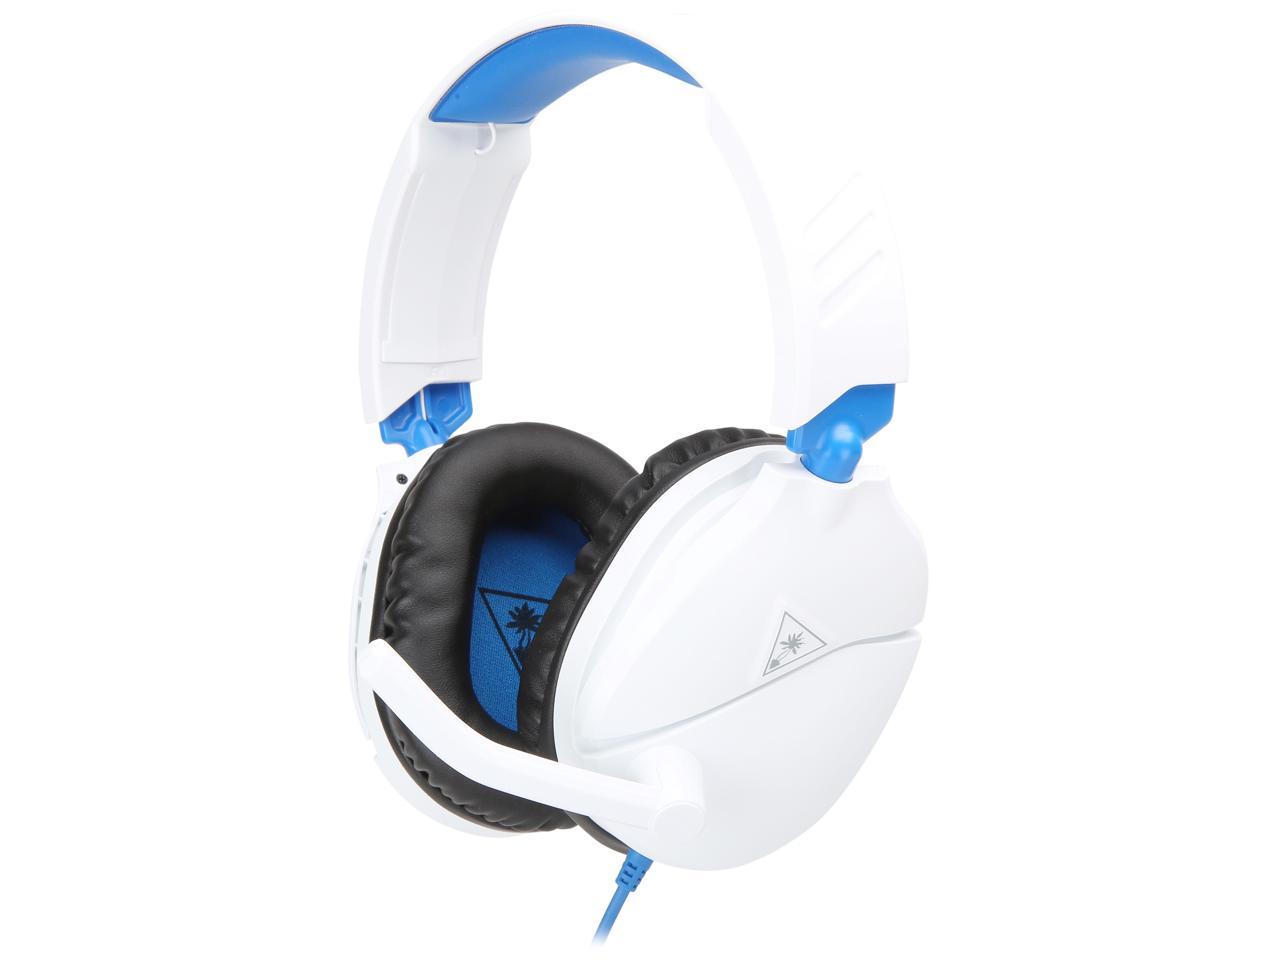 turtle beach recon 70 white gaming headset for xbox one